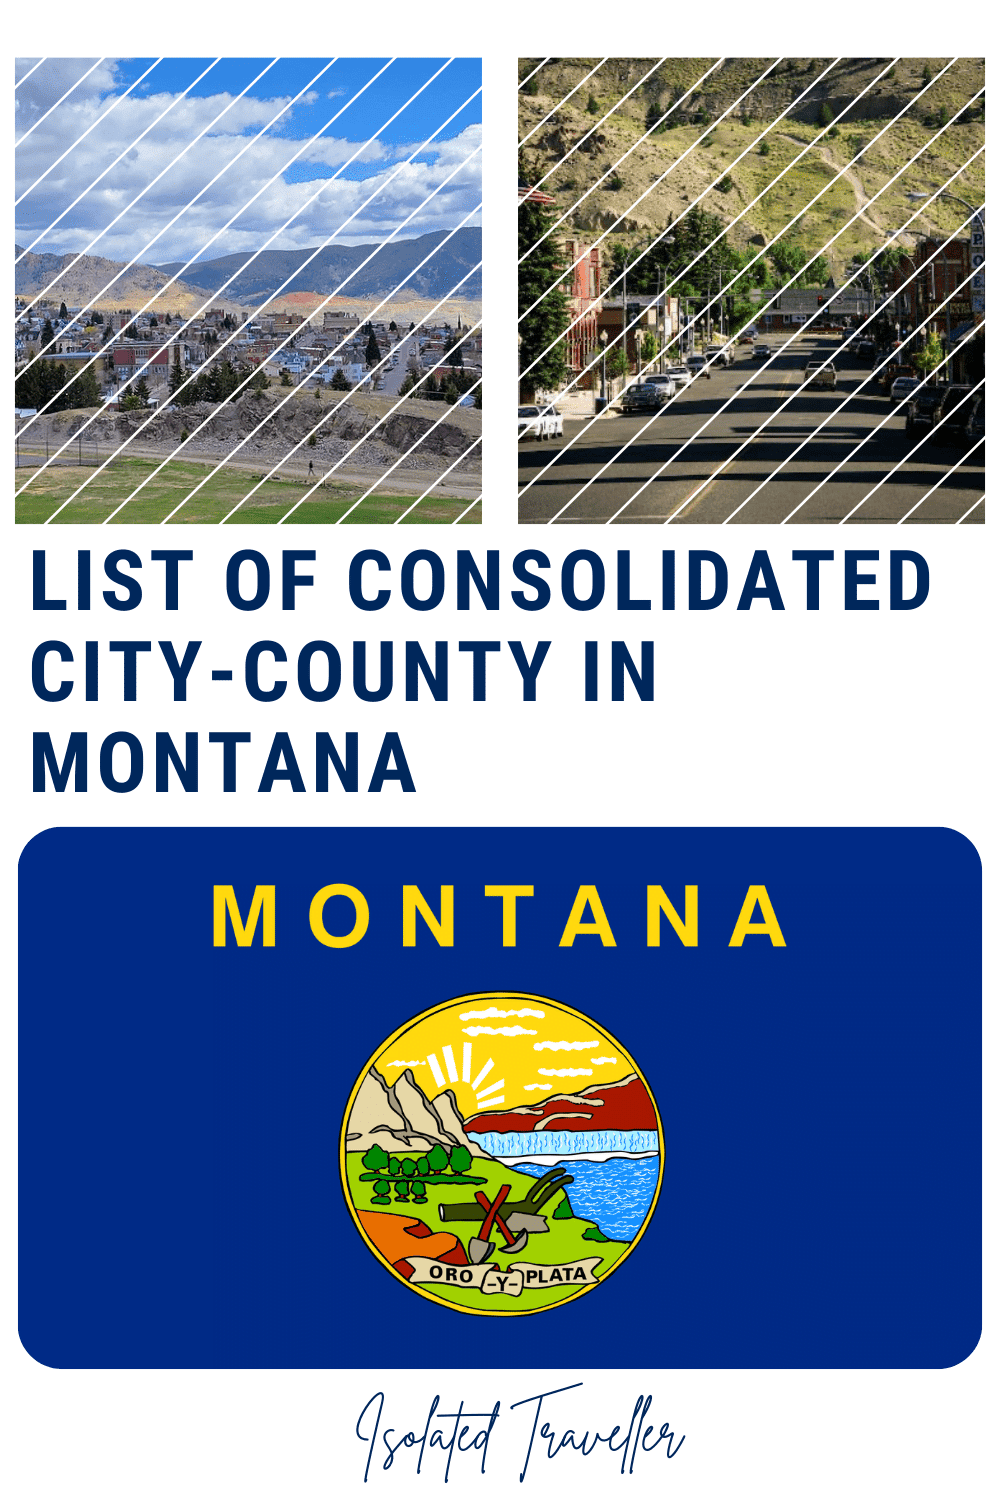 List of Consolidated City-County in Montana